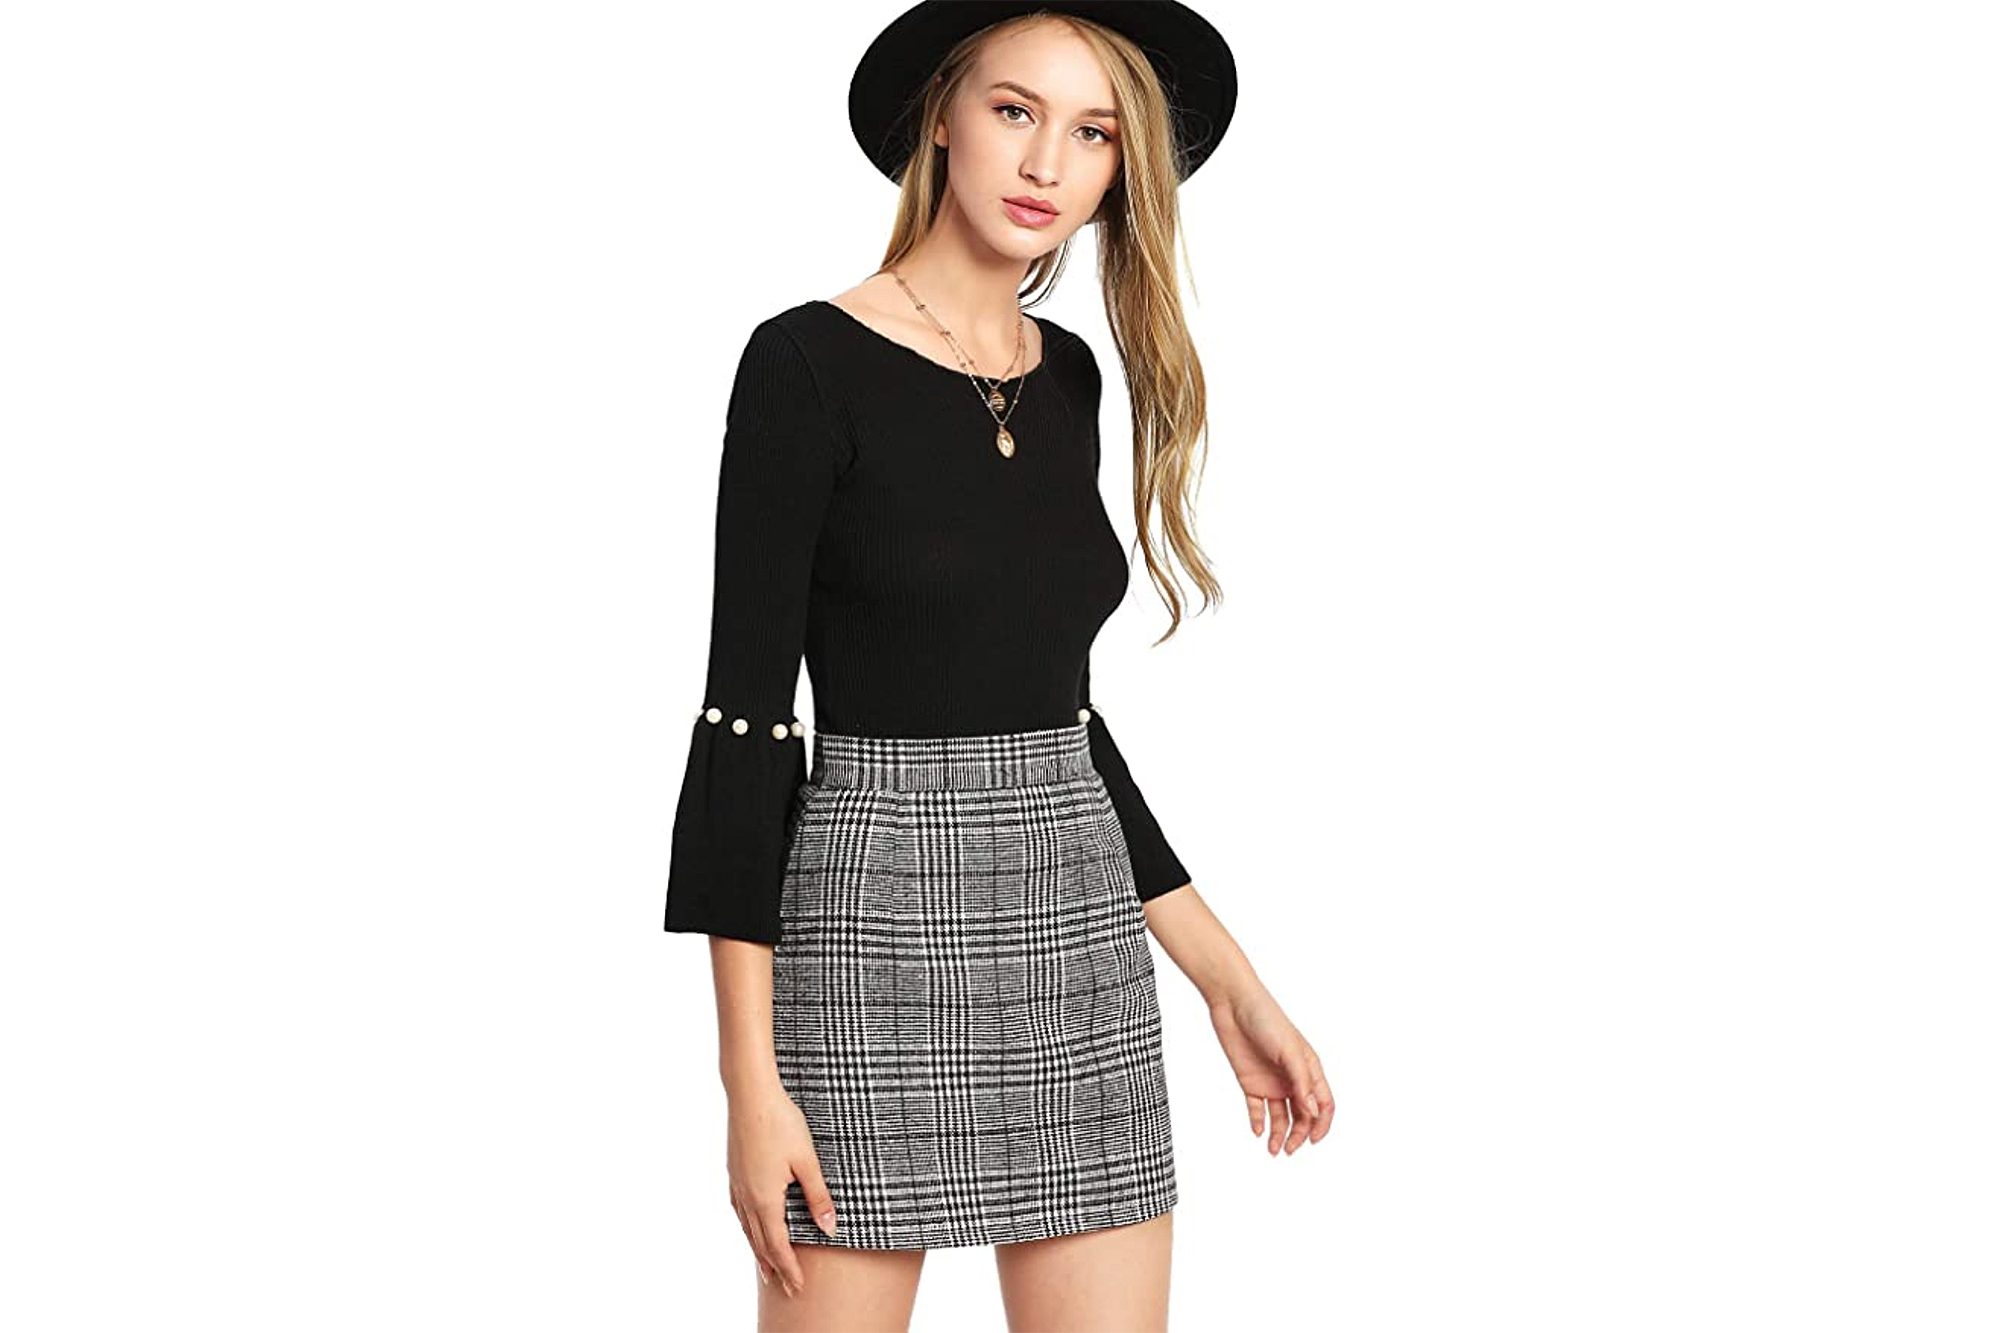 Florens Year-Round Miniskirt Is Under $30 and an Amazon Top Seller